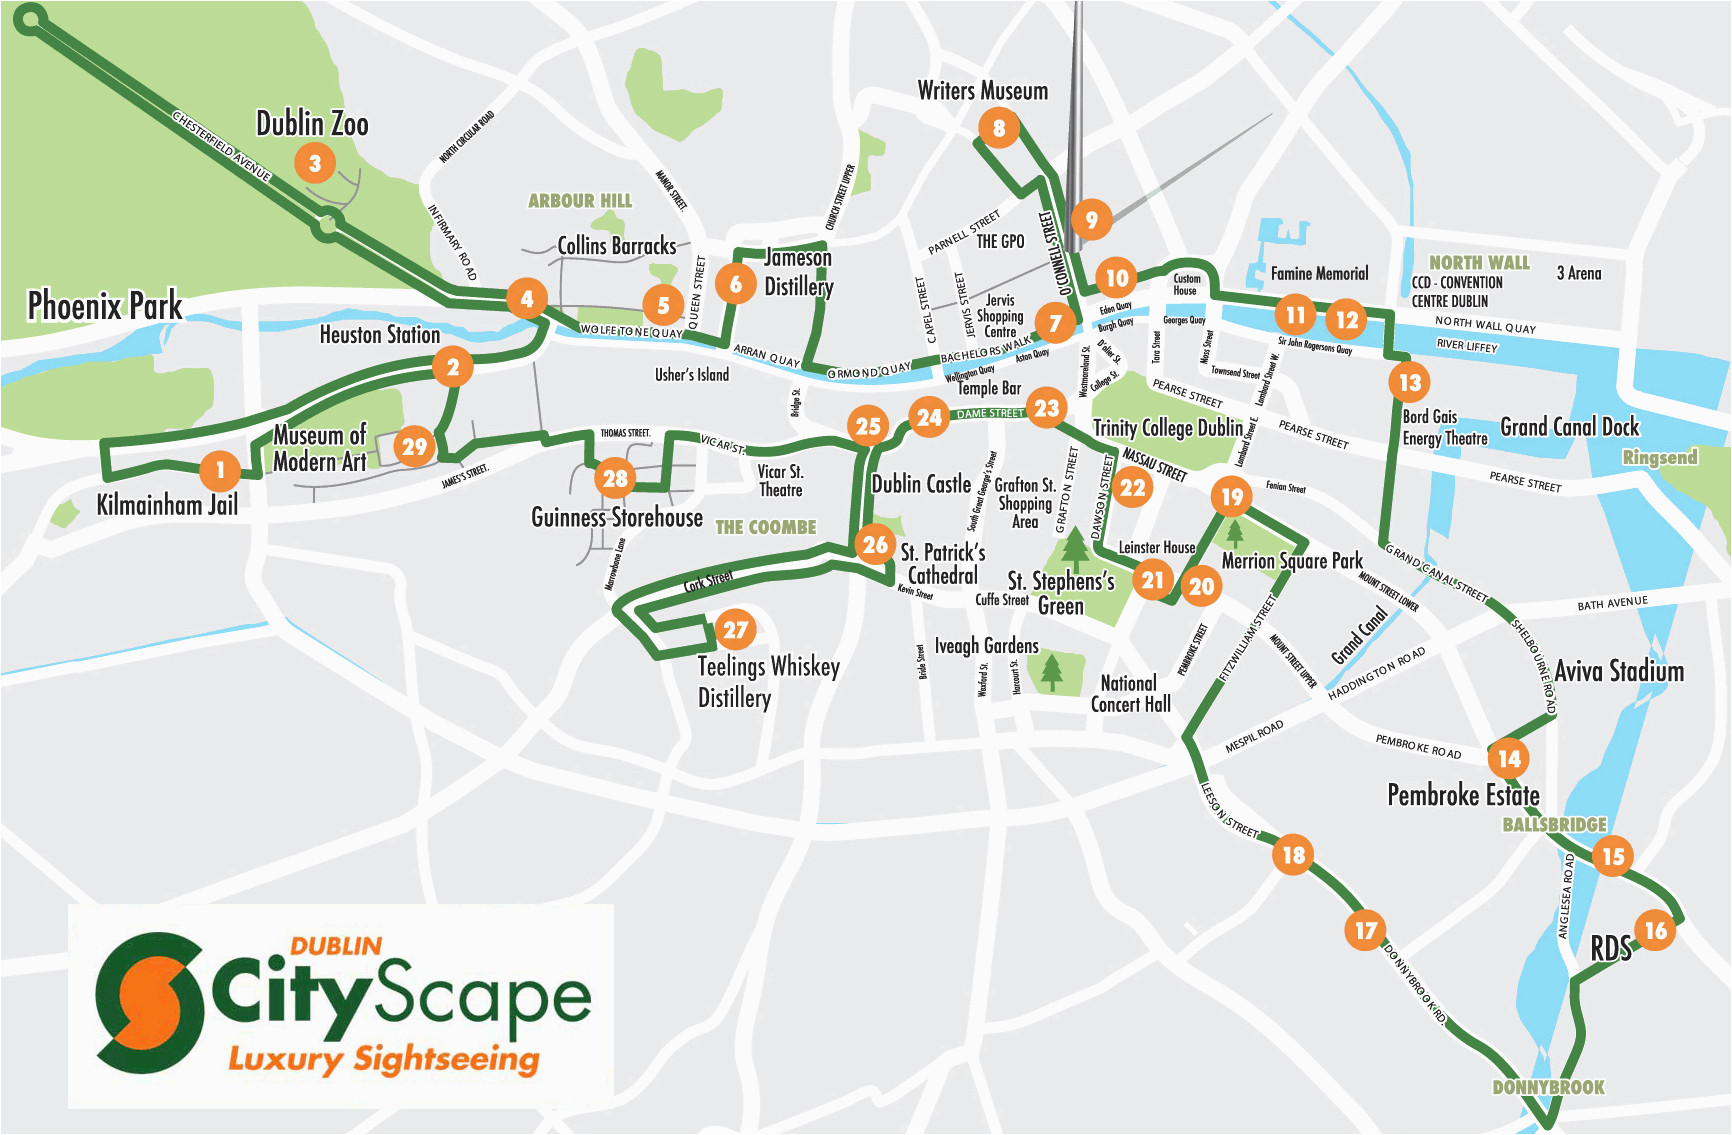 cityscape dublin hop on hop off sightseeing tour route map ireland